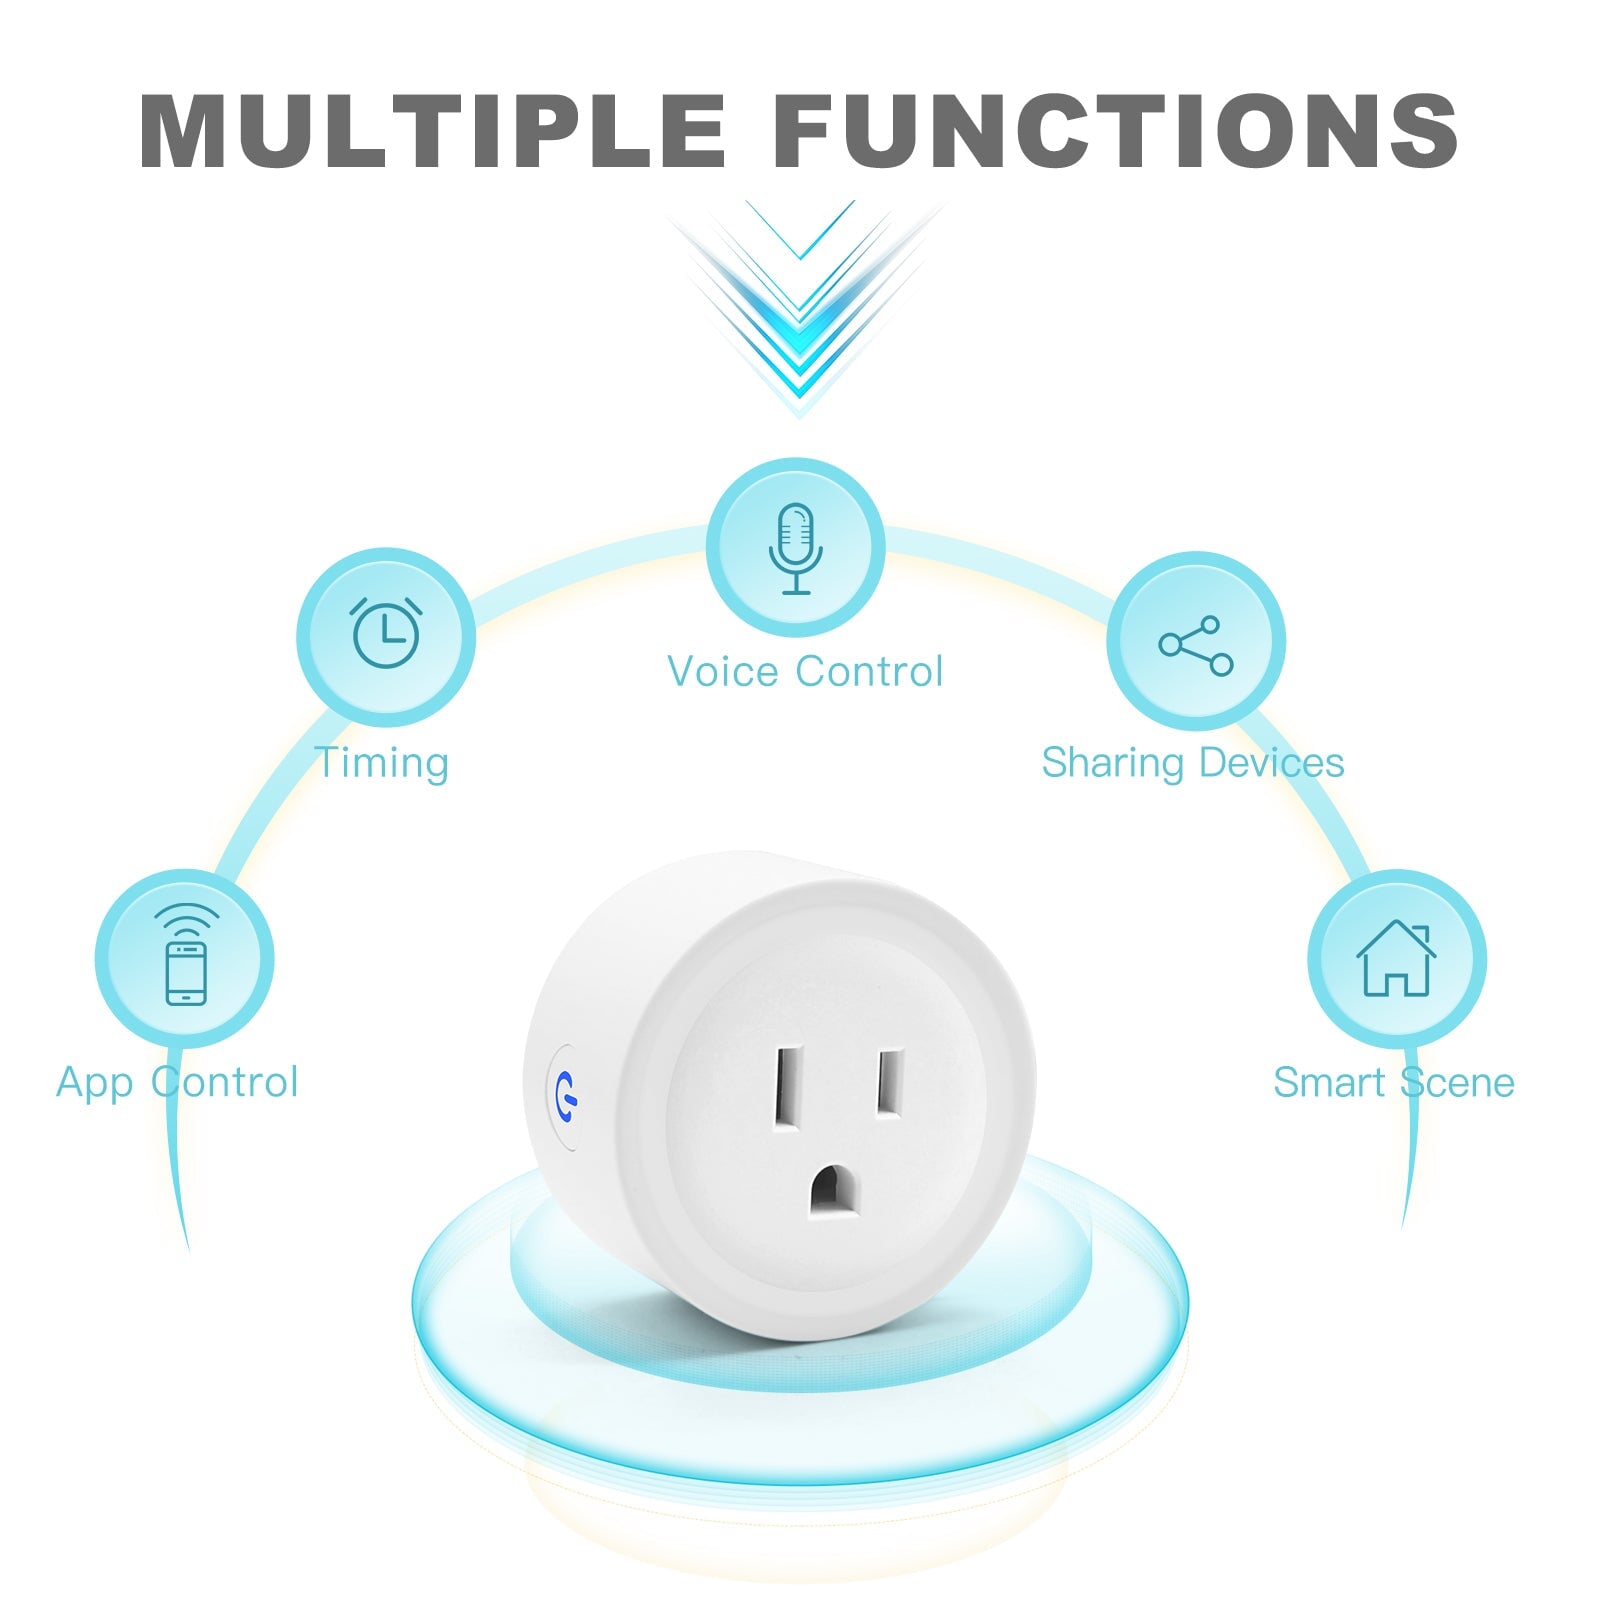 BSEED Mini Smart WiFi Plug with Energy Monitoring Power Outlets & Sockets Bseedswitch 